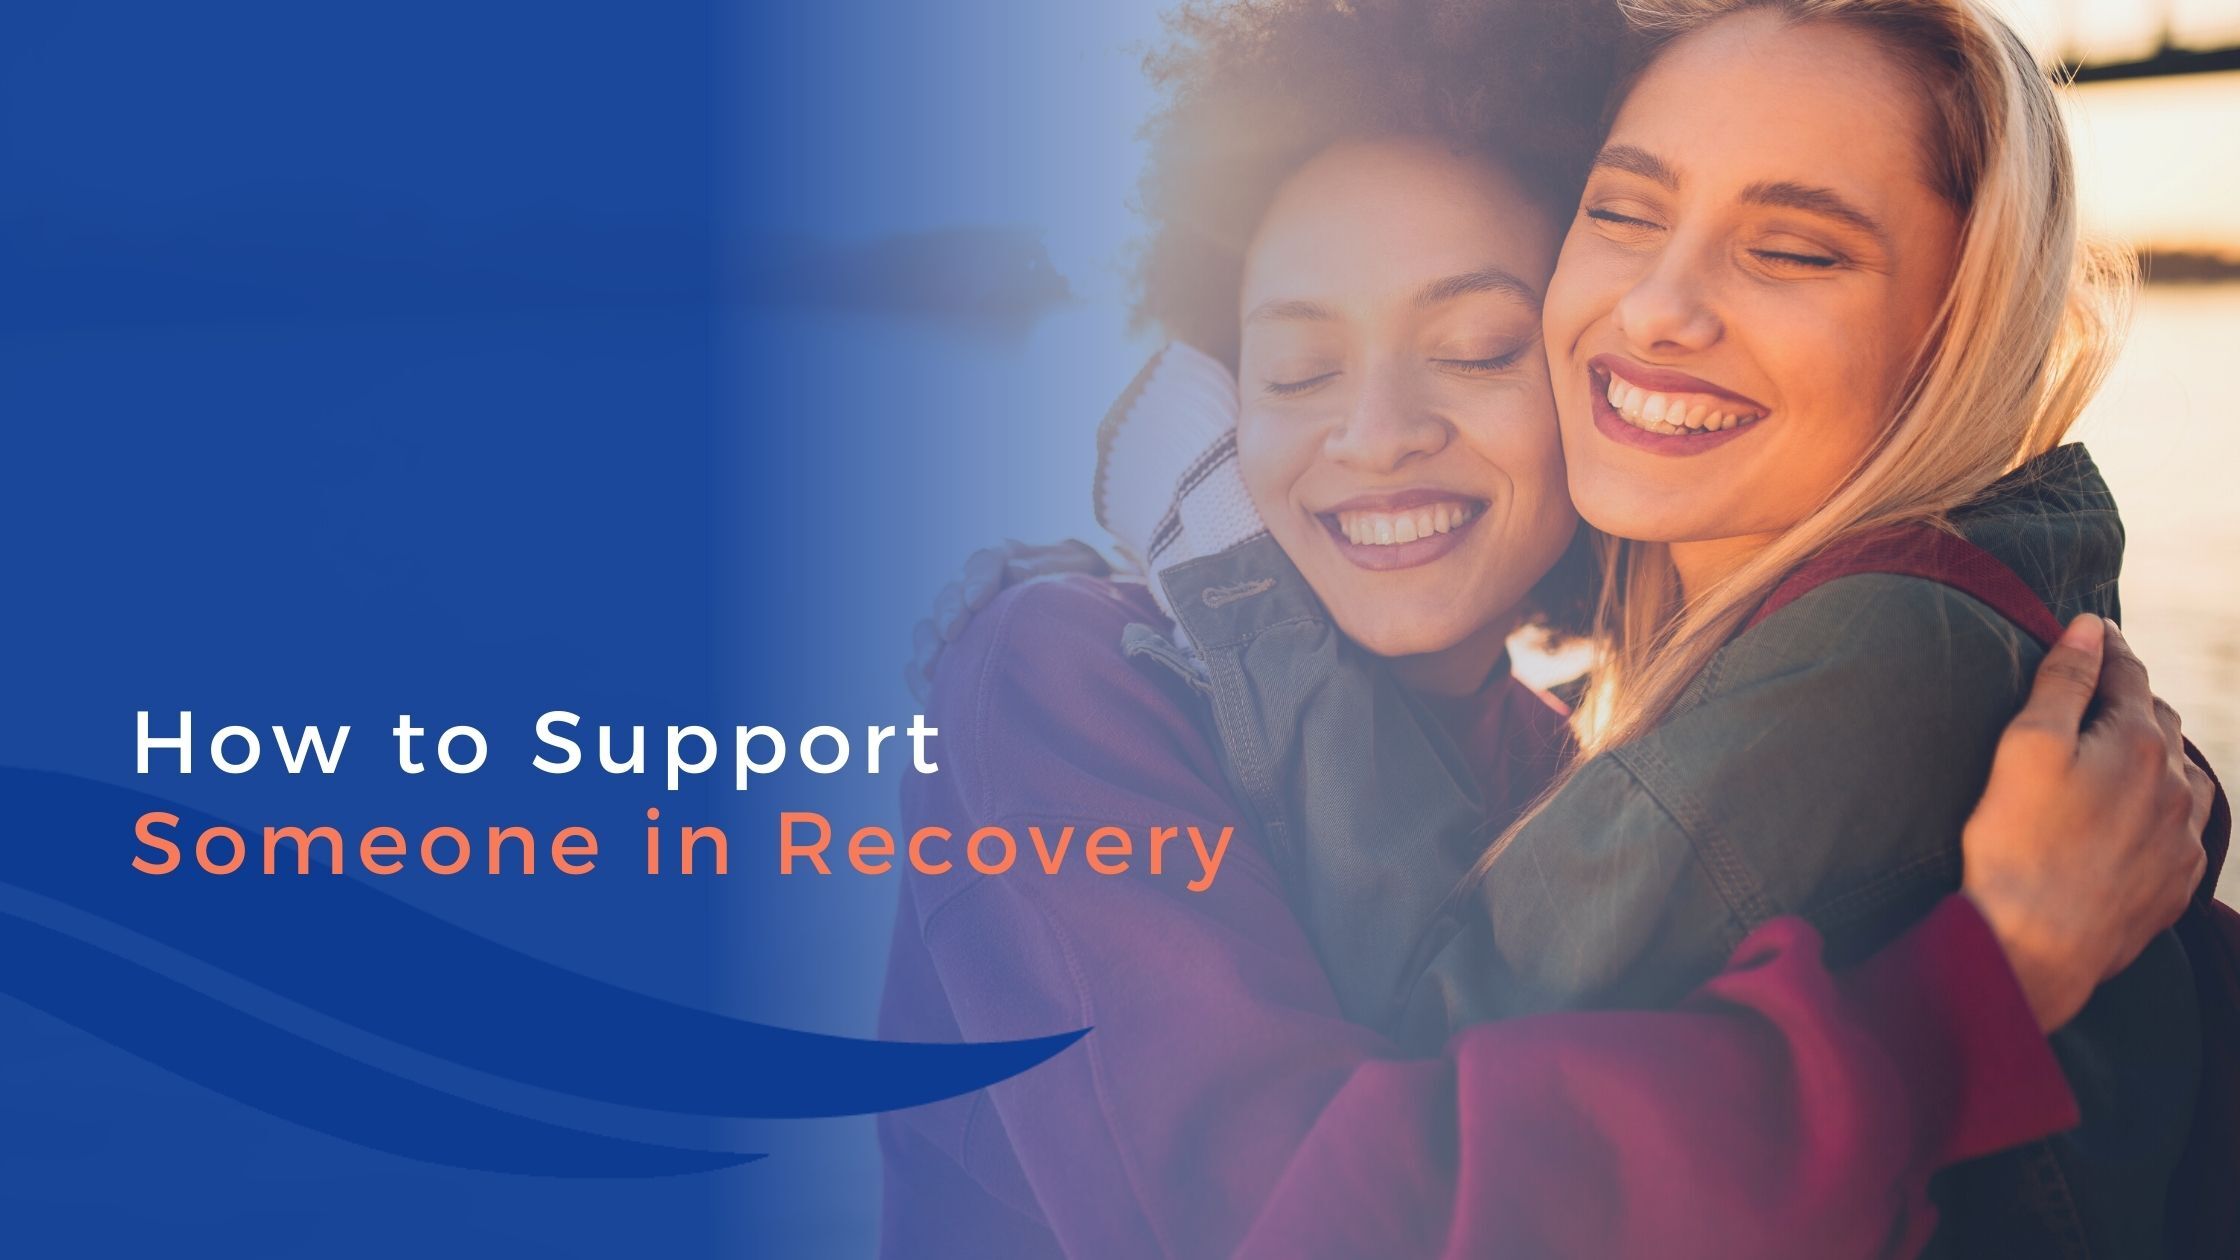 How to support someone in recovery